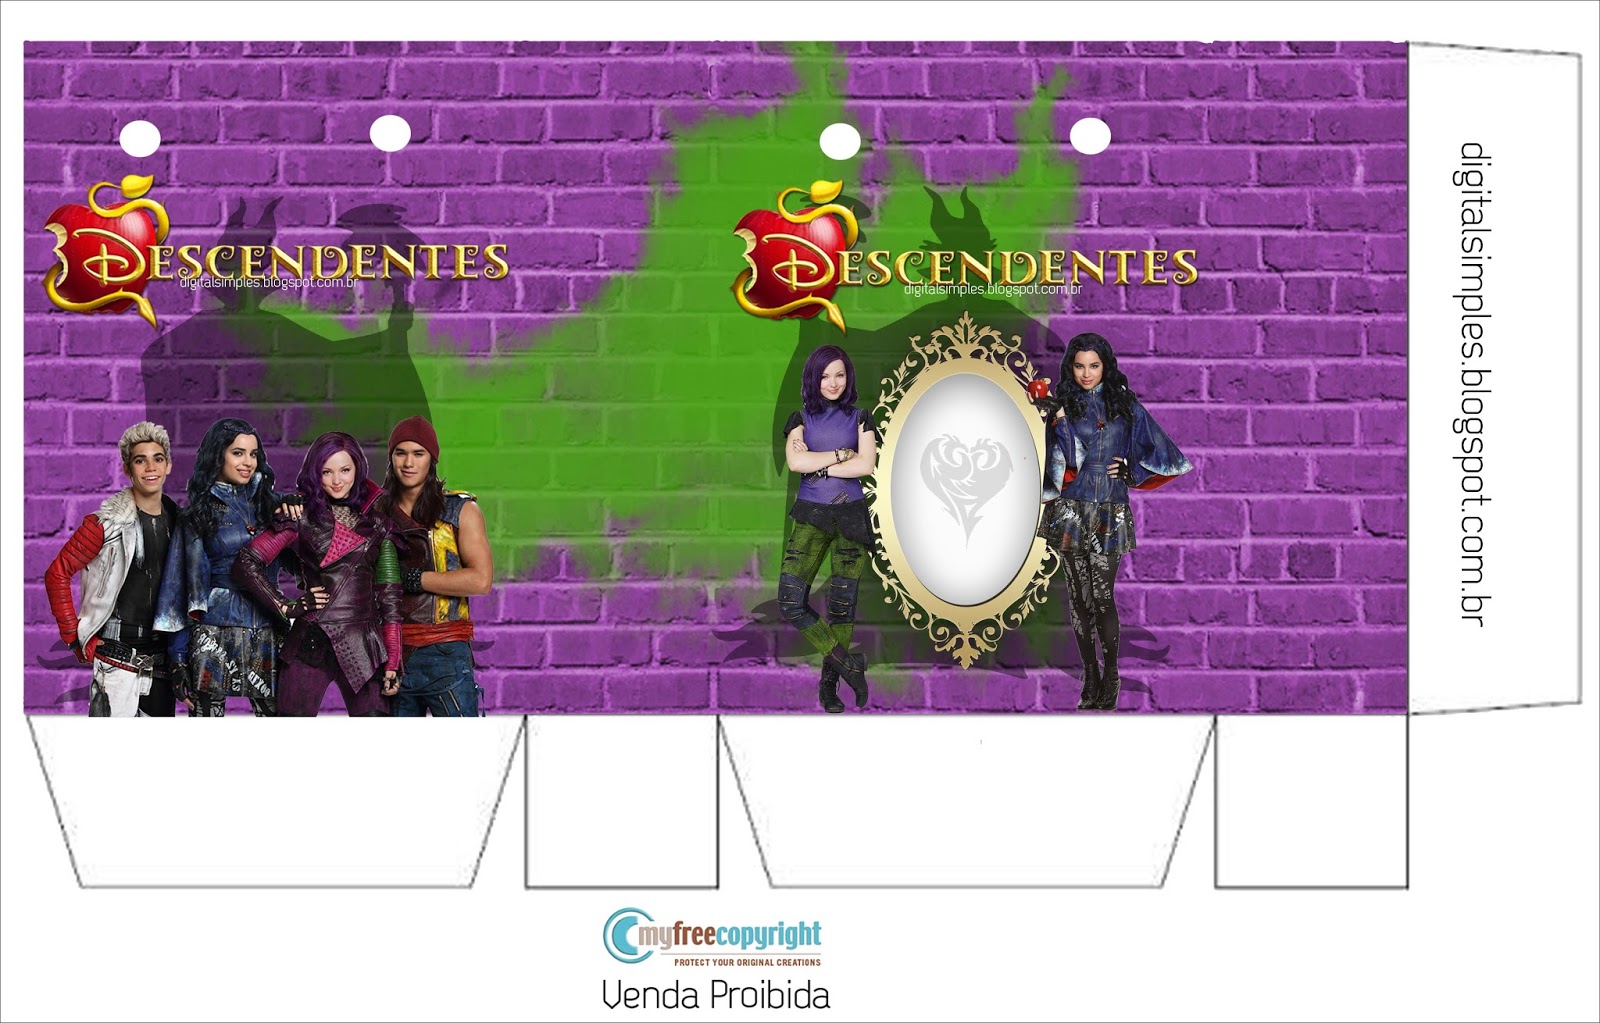 Descendants: Free Printables Boxes. - Oh My Fiesta! in english